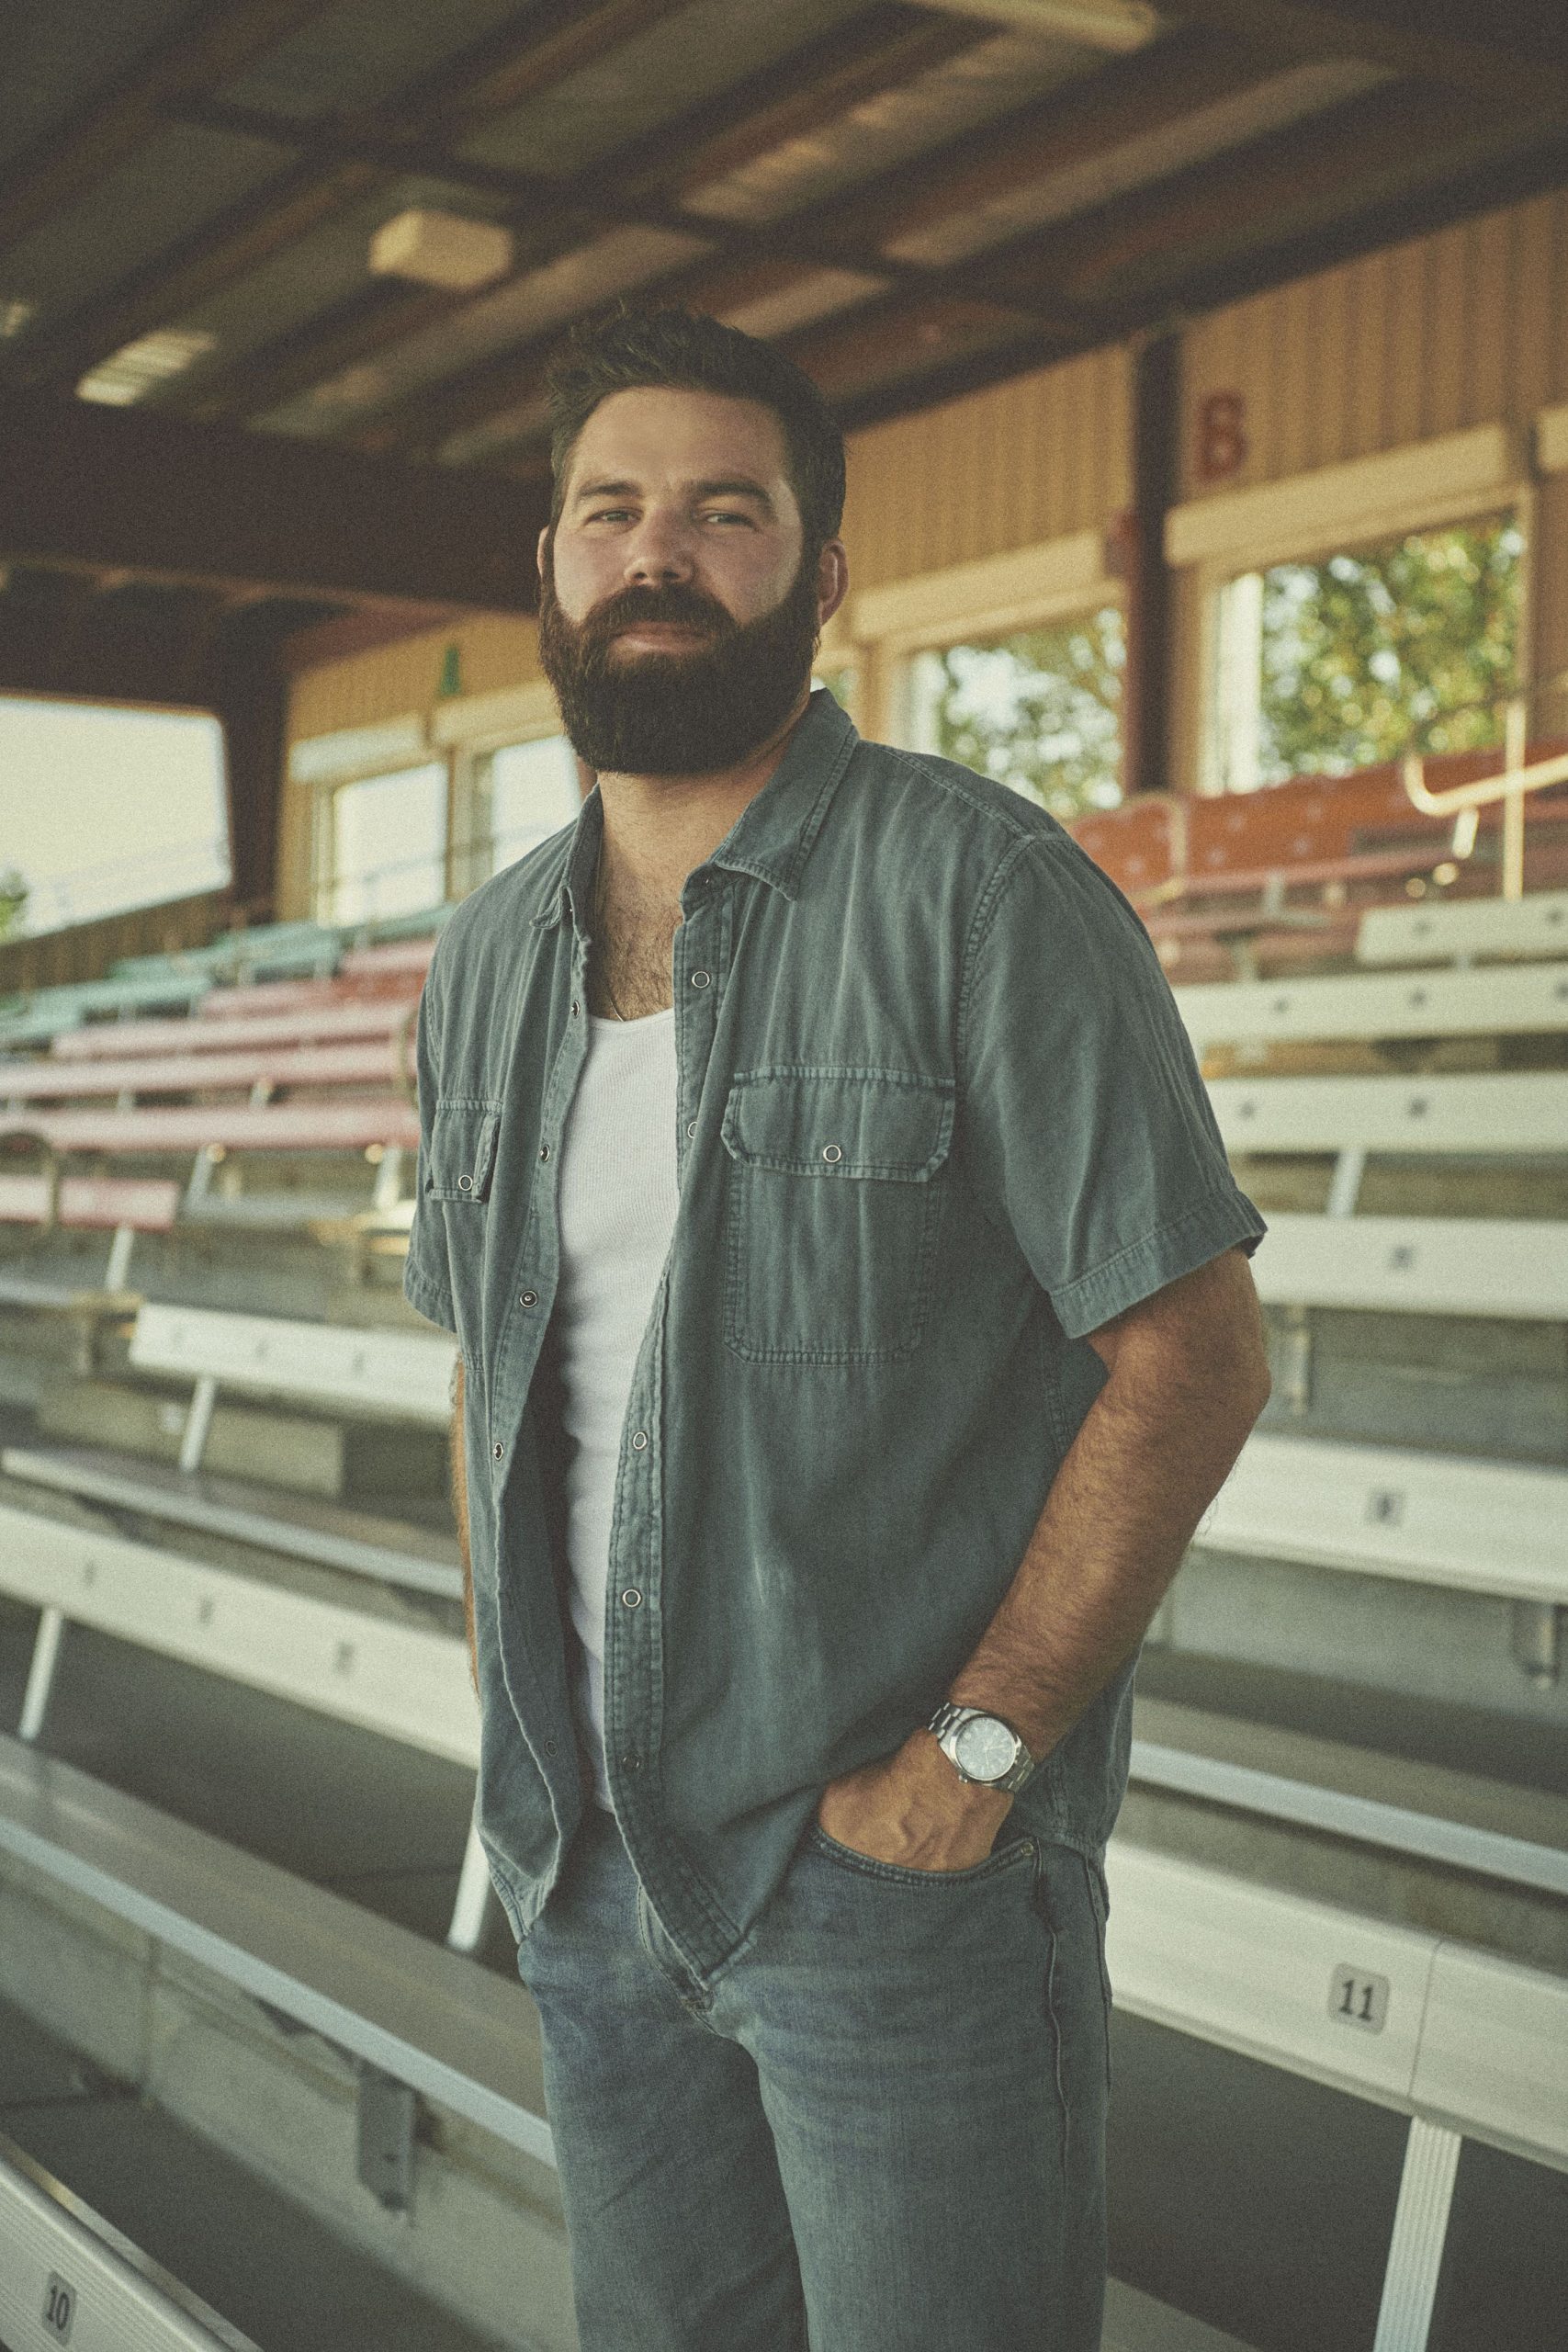 JORDAN DAVIS EARNS 7th No. 1 AT COUNTRY RADIO COUNTRY WITH “TUCSON TOO LATE”